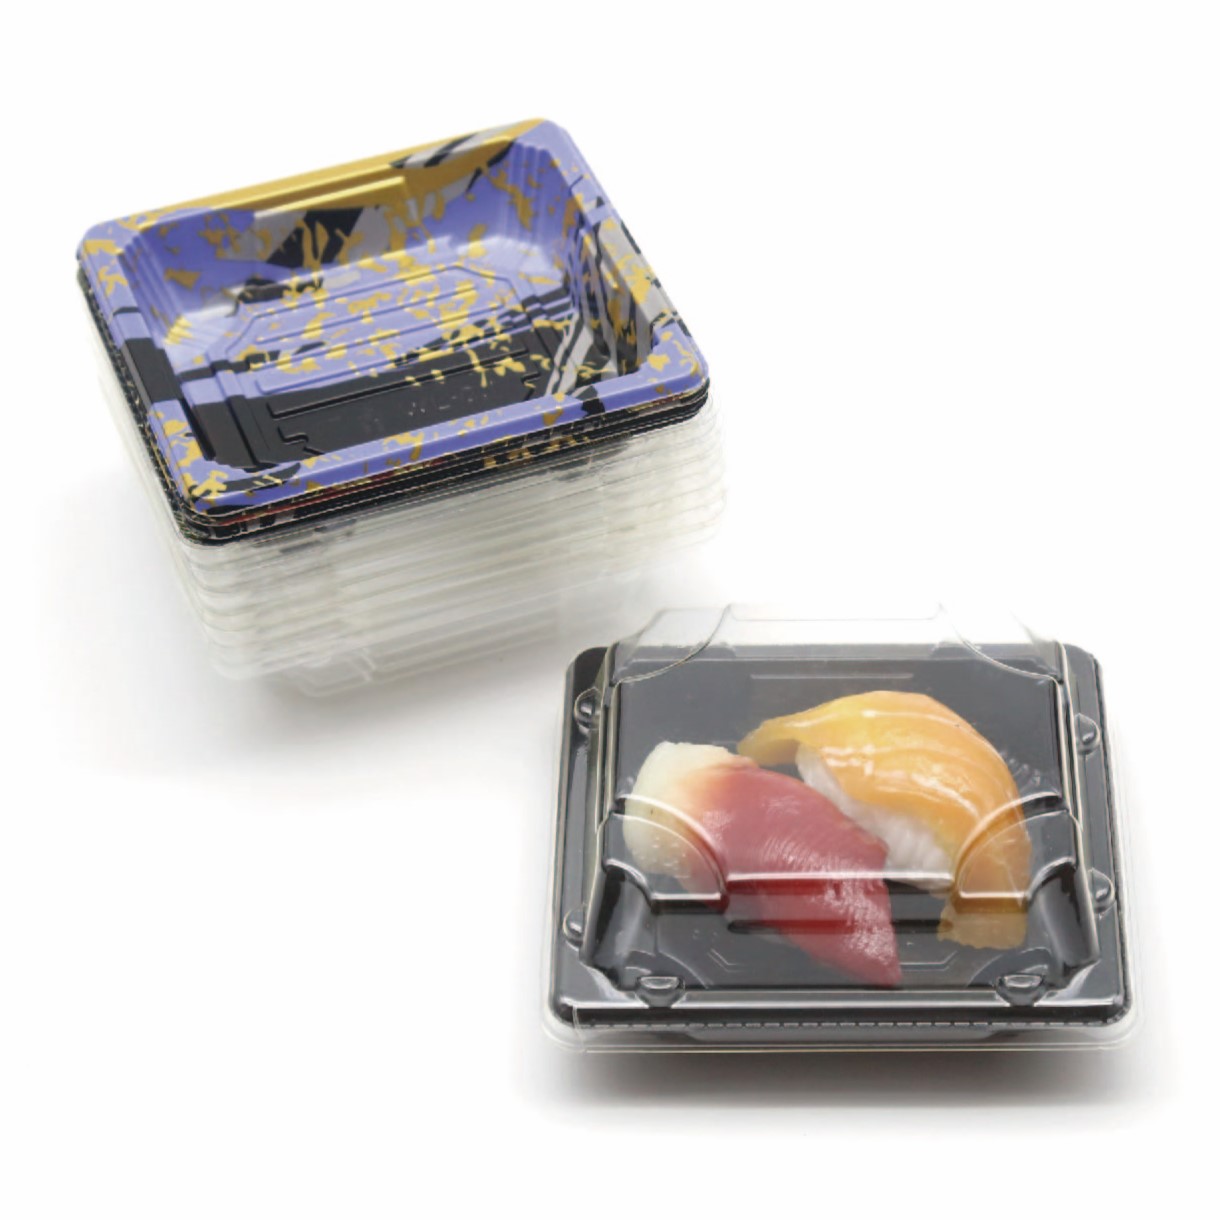 The sushi tray WL-0.1 is stackable for easy storage and placement.